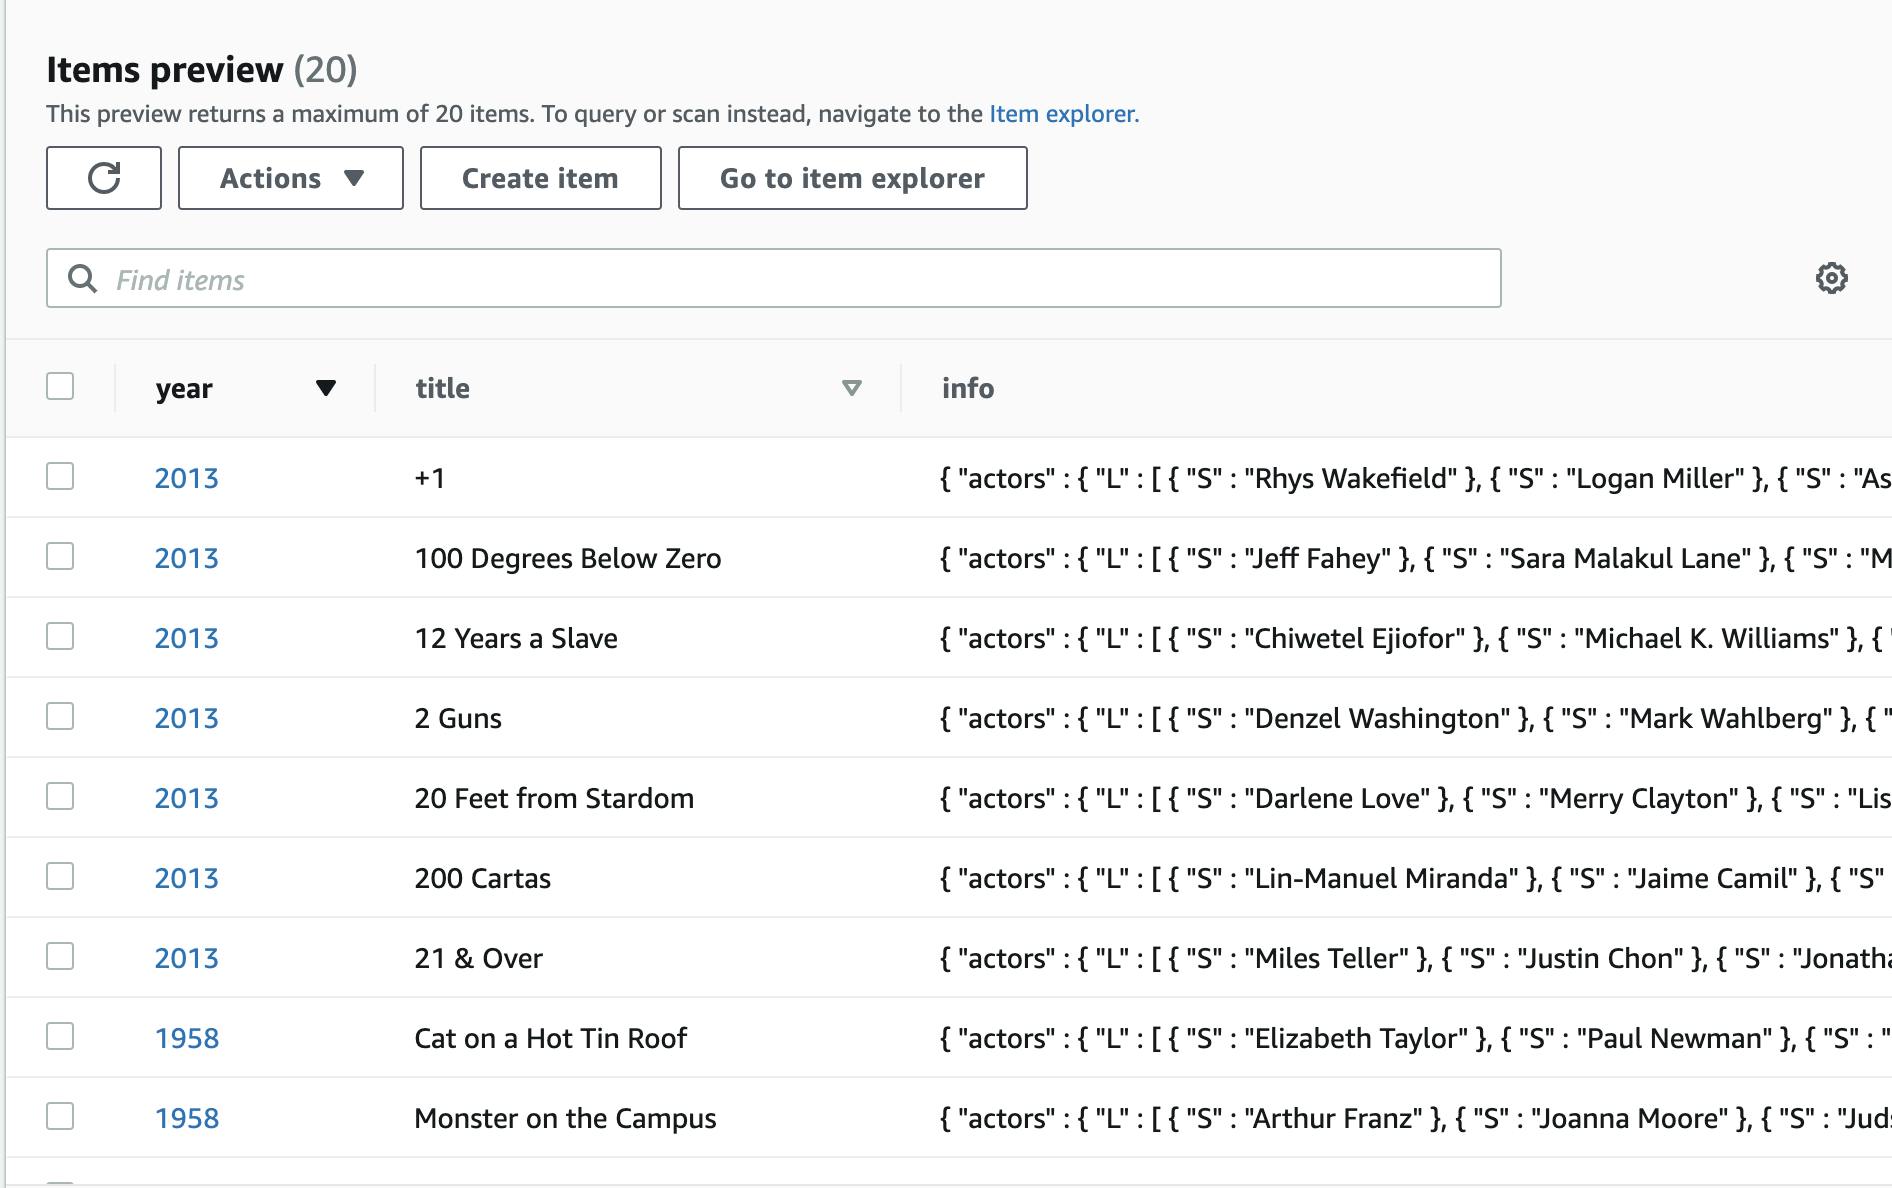 Preview of dynamoDb Movies table